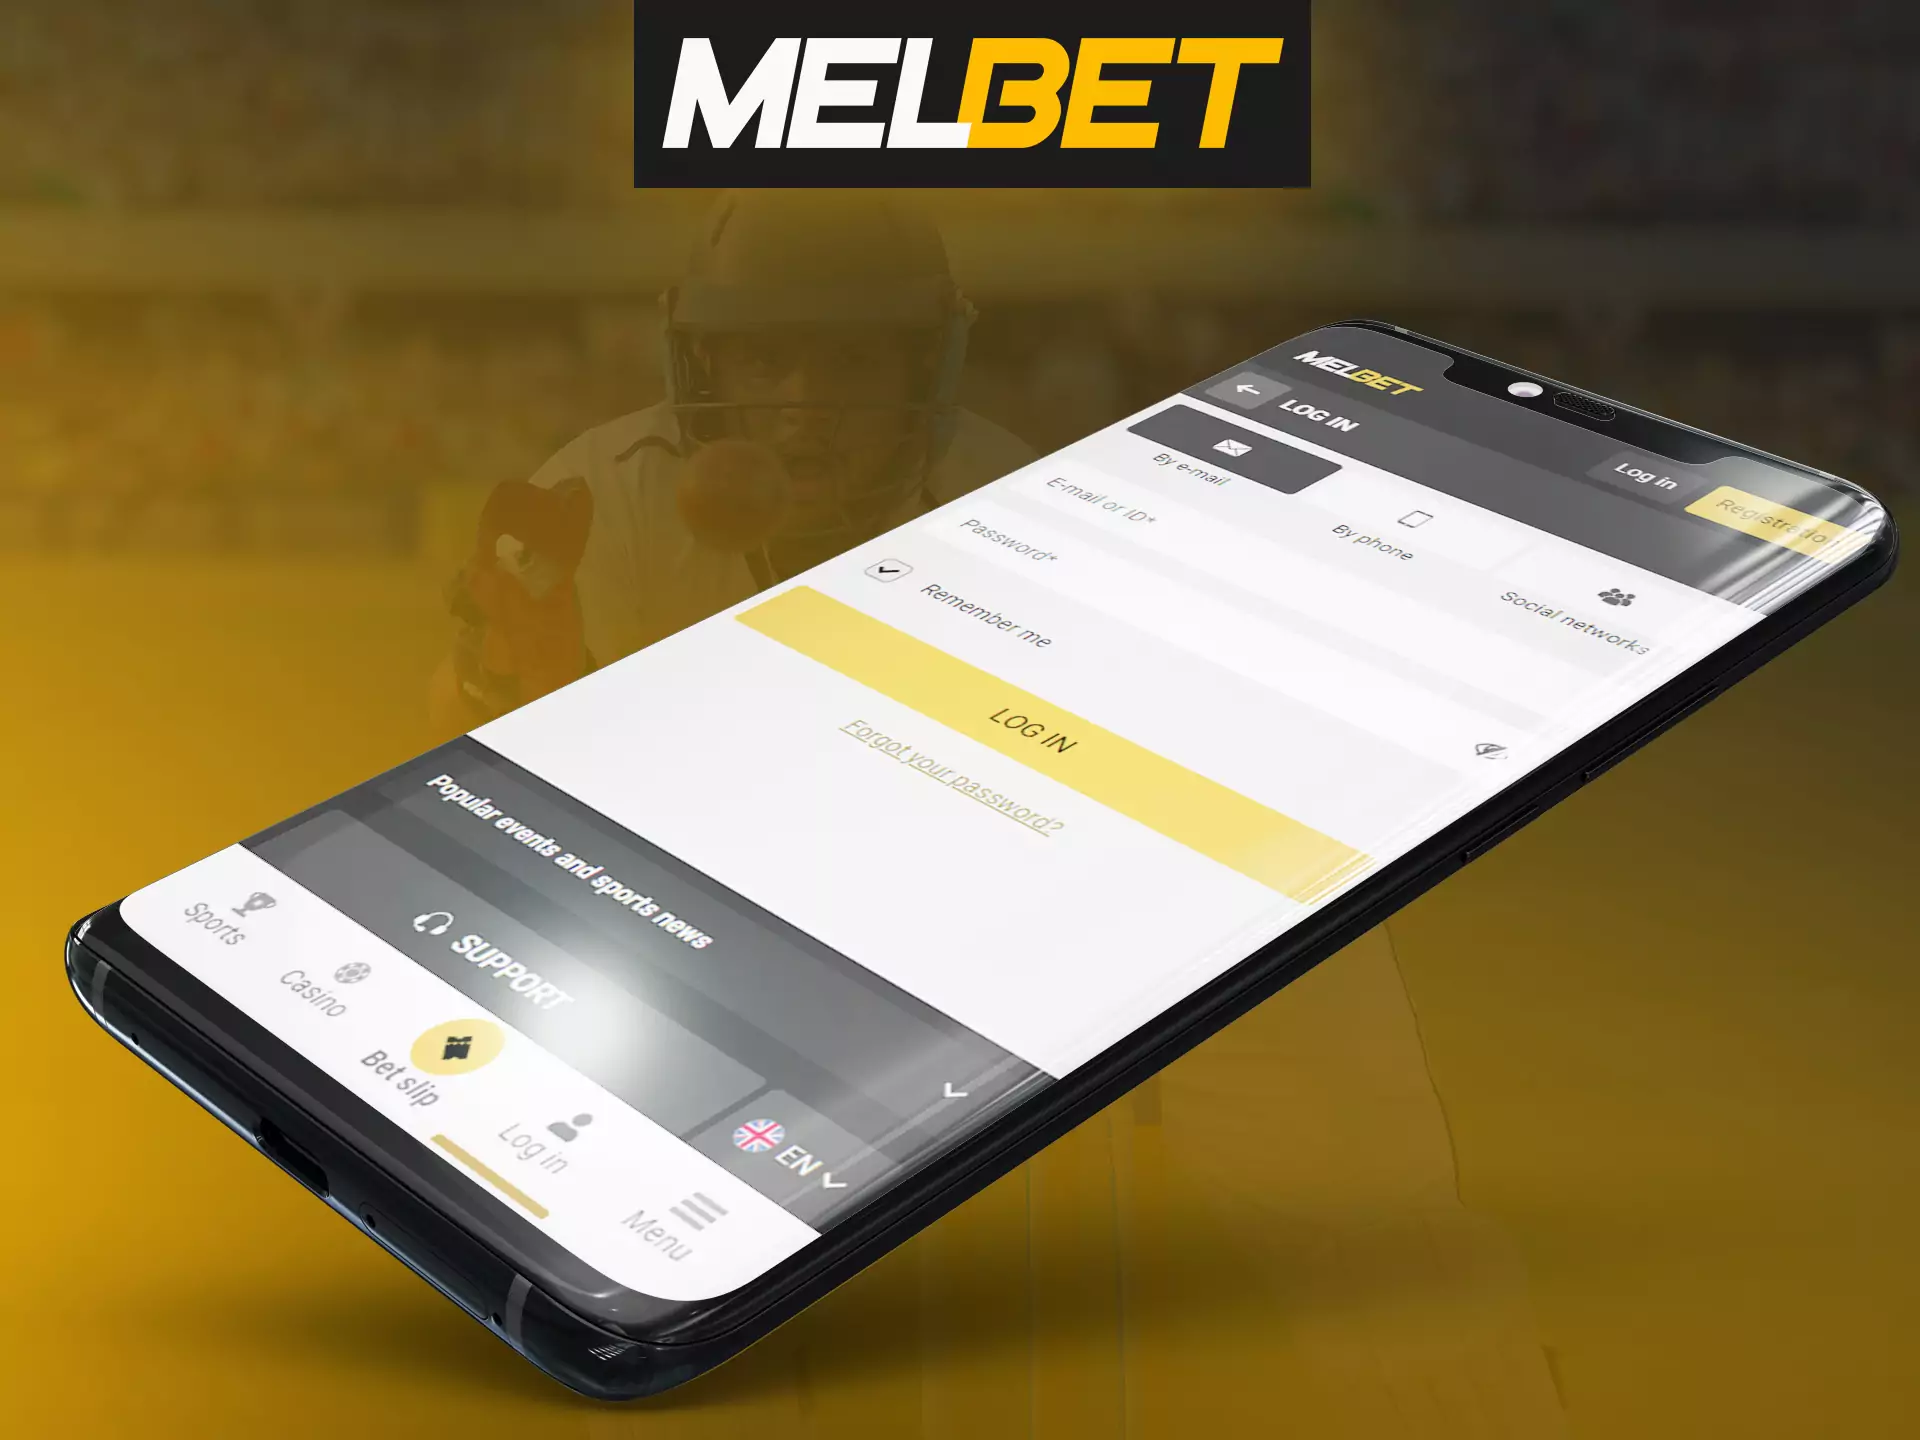 In the Melbet app, log in to your account to place bets.